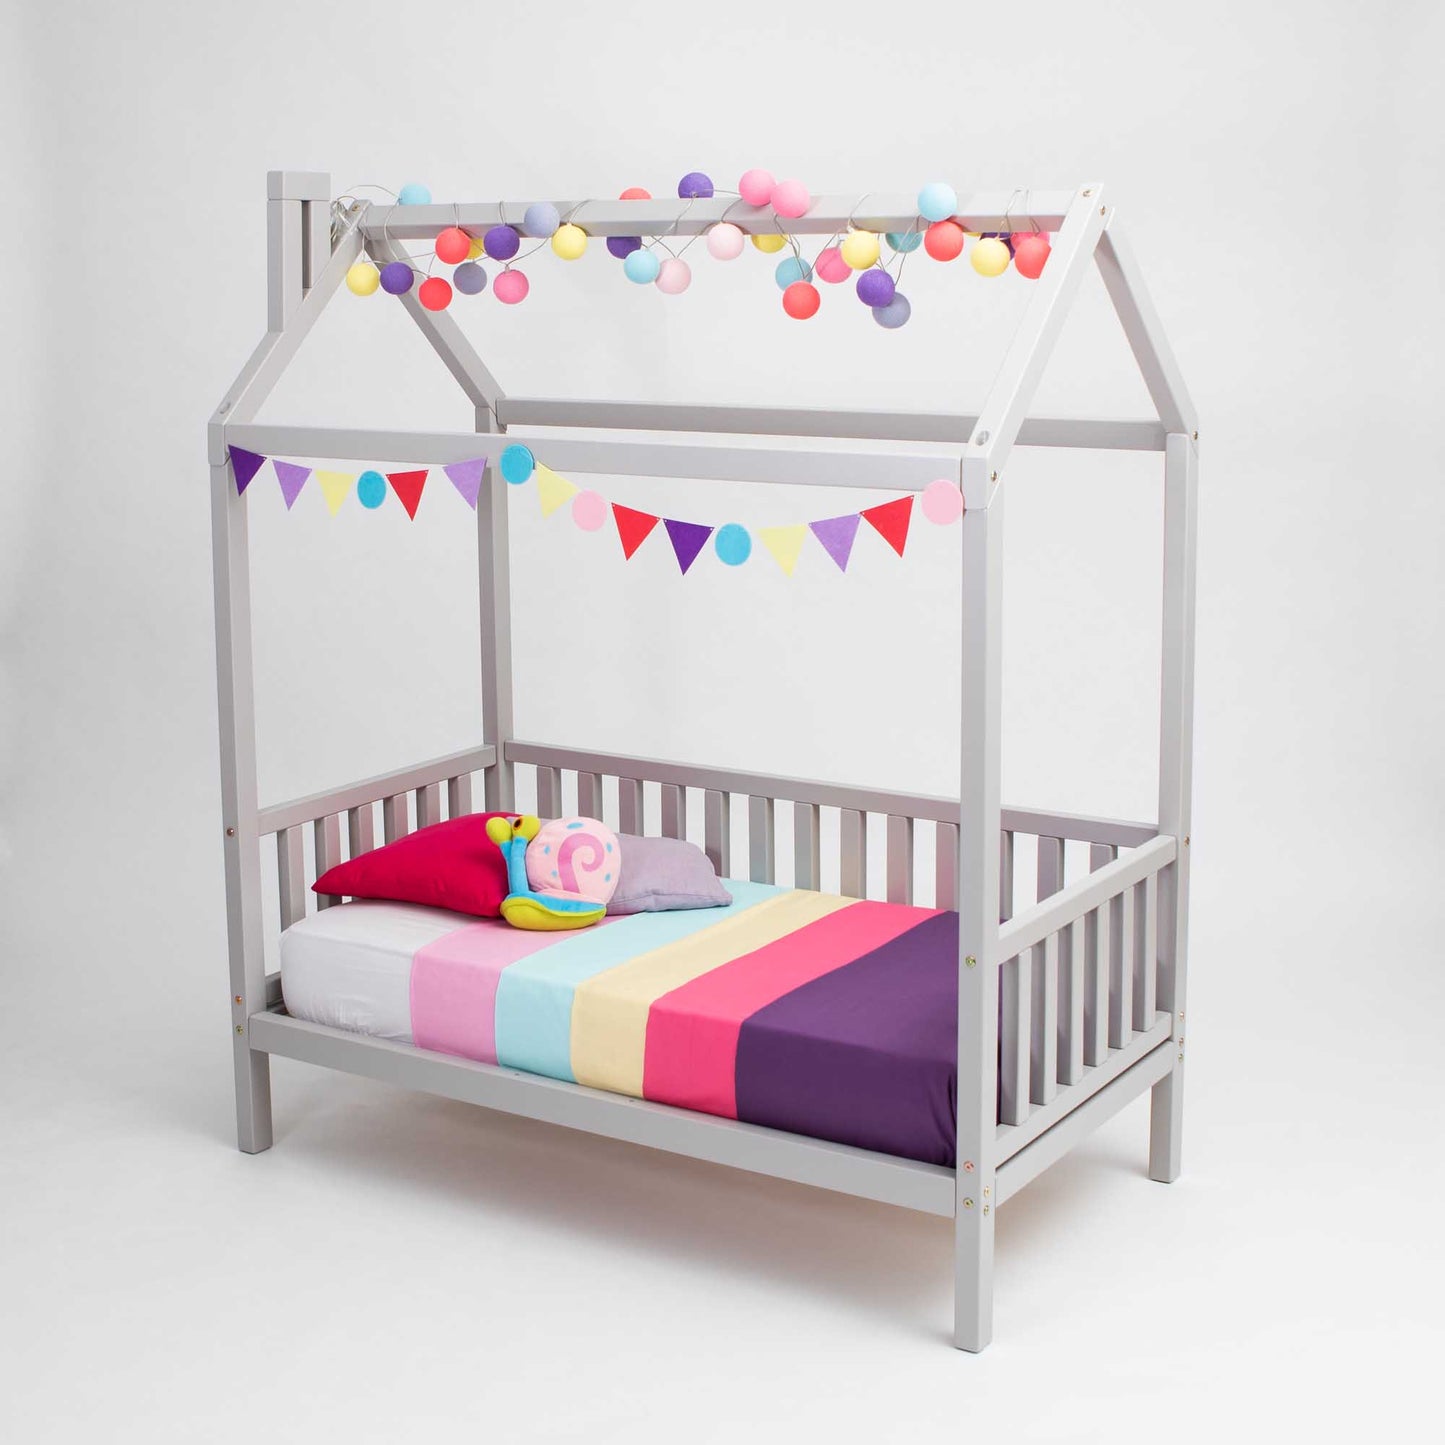 A raised house bed on legs with 3-sided rails, with a rainbow striped blanket and pom poms.